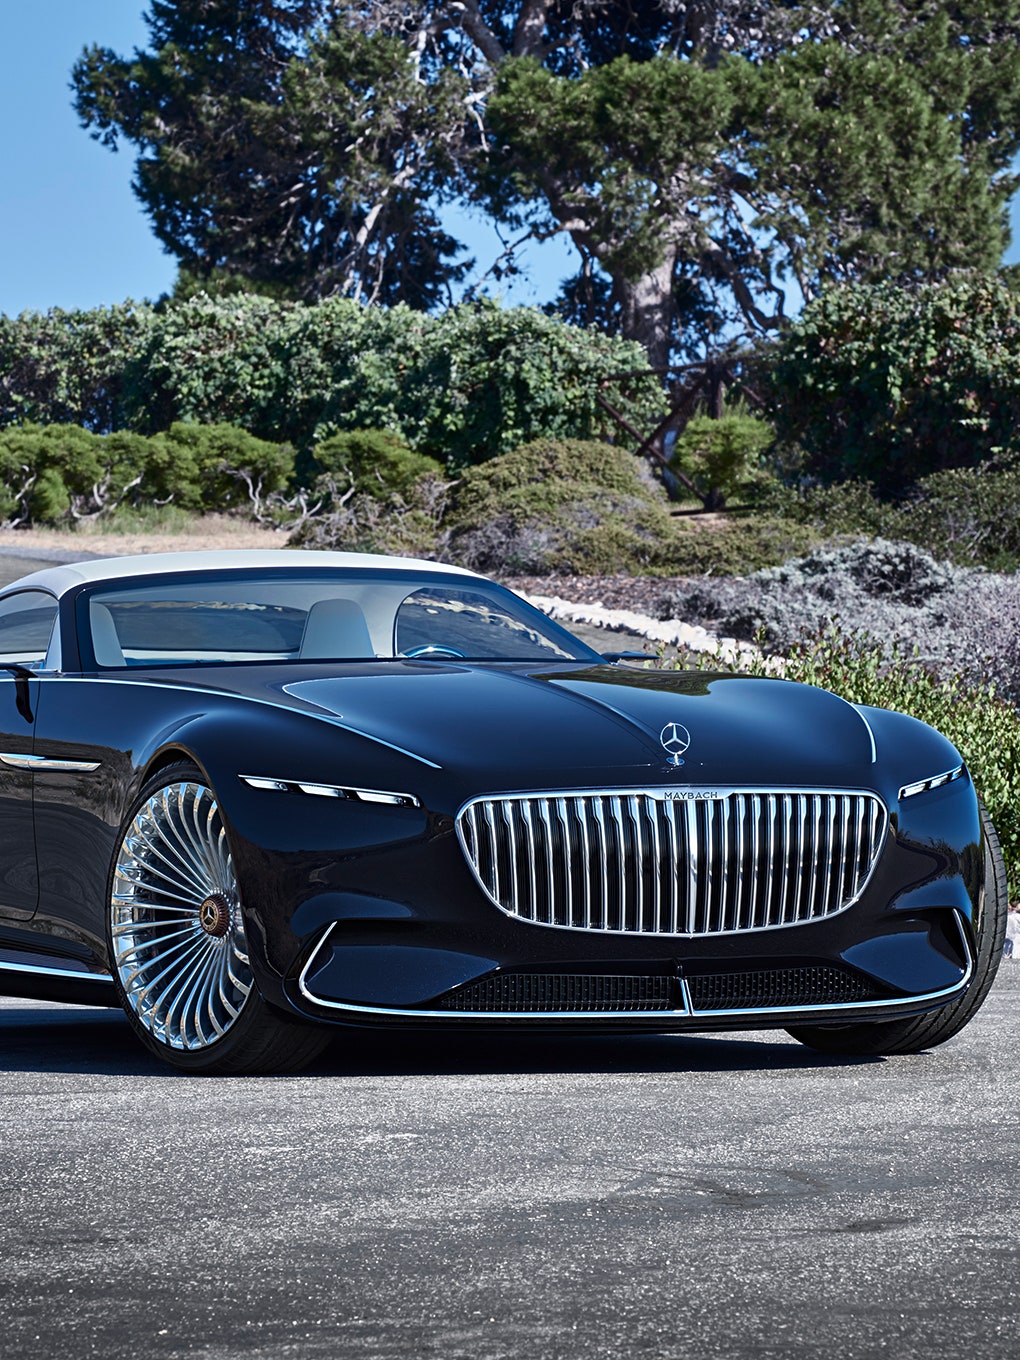 Mercedes-Maybach Unveils a Stunning New All-Electric Luxury Convertible |  Architectural Digest